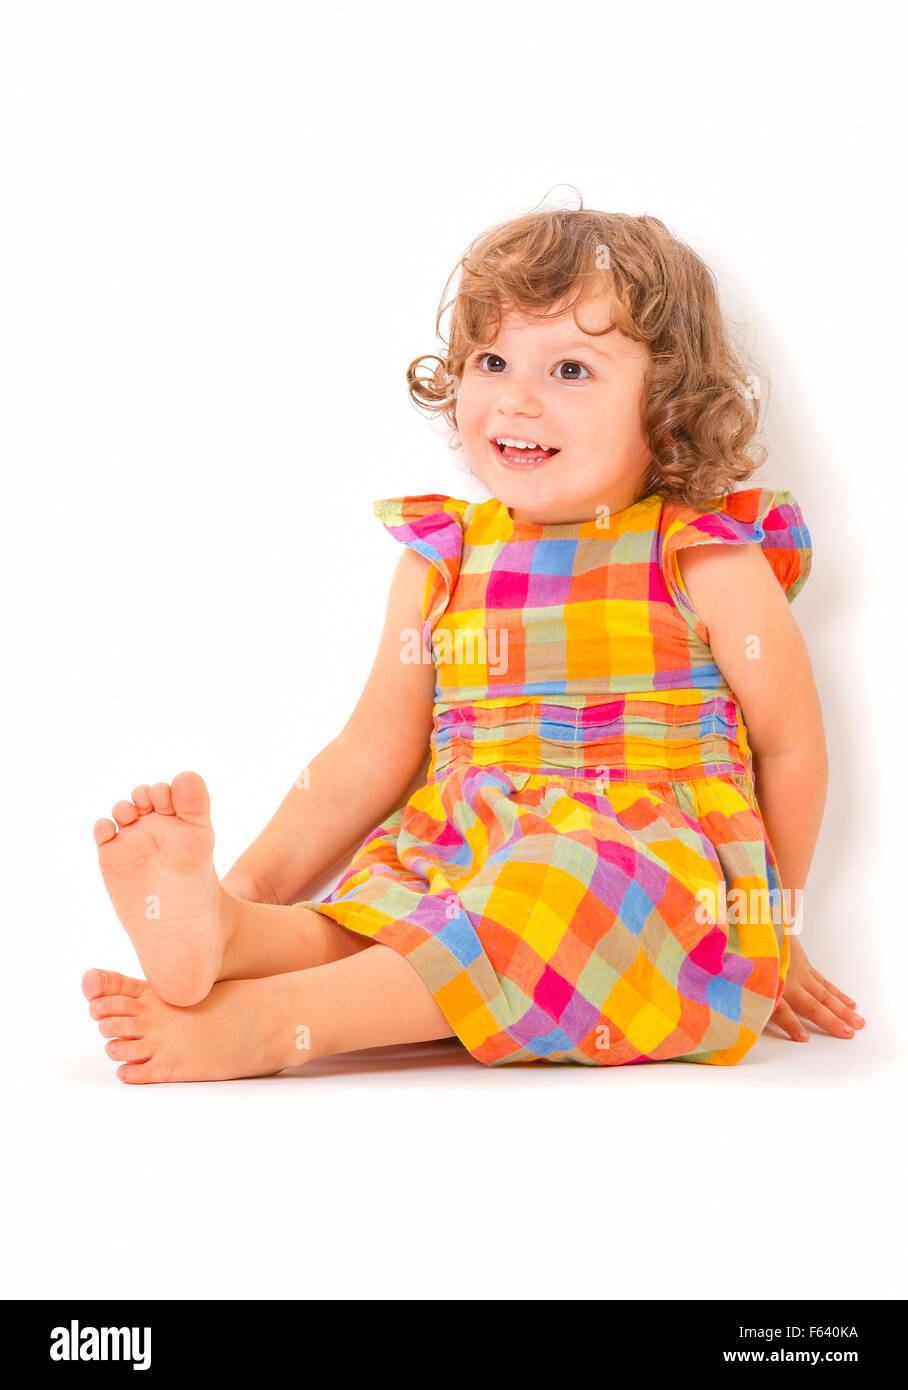 Cute little girl sitting on the floor and smiling on white background. Stock Photo